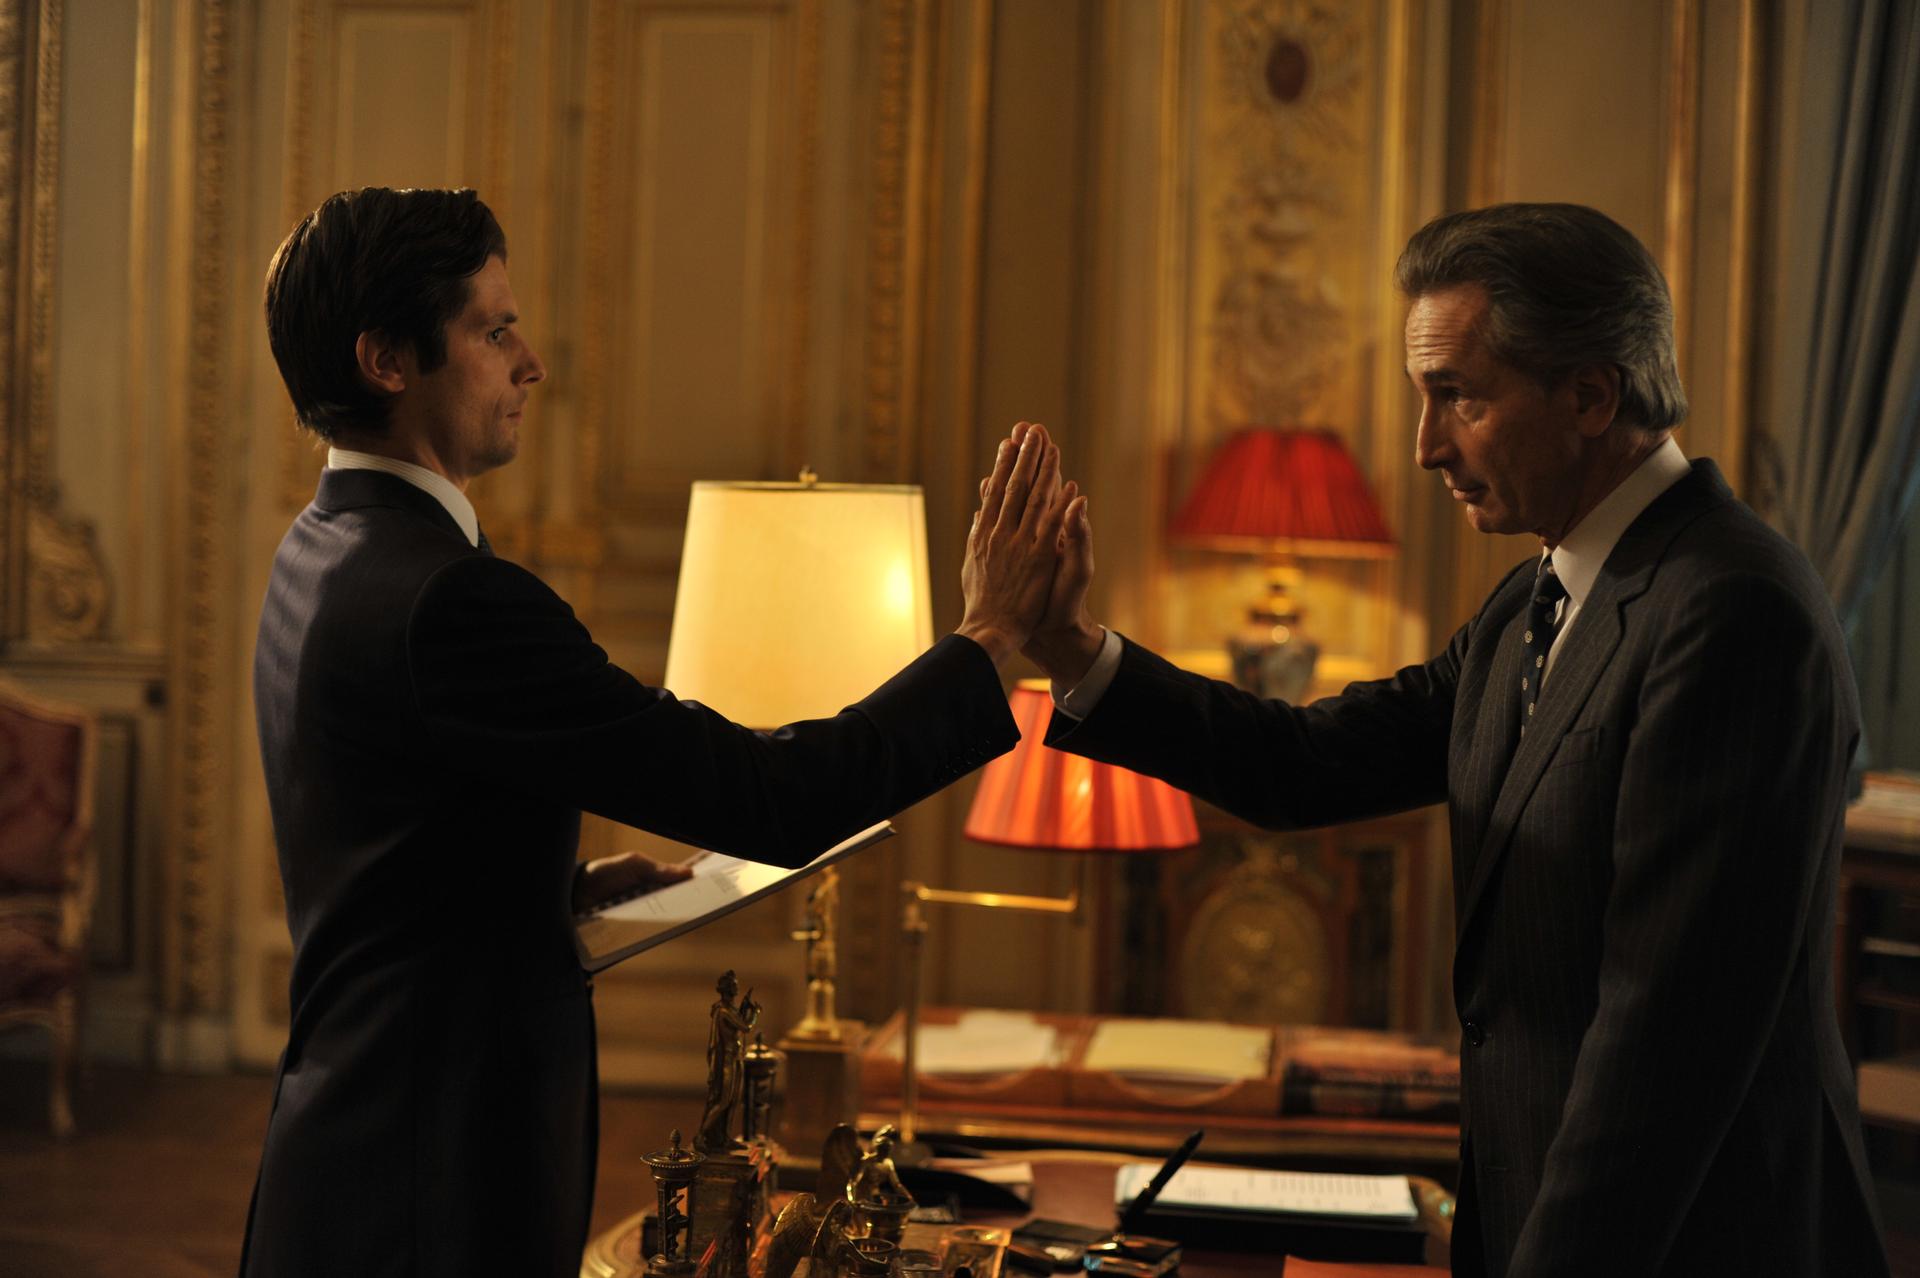 Speech writer Arthur Vlaminck (Raphaël Personnaz) tries to high-five French Foreign Minister Alexandre Taillard de Worms (Thierry Lhermitte) in Bertrand Tavernier’s new film, THE FRENCH MINISTER, a comedy based on the graphic novel "Weapons of Mass Diplom